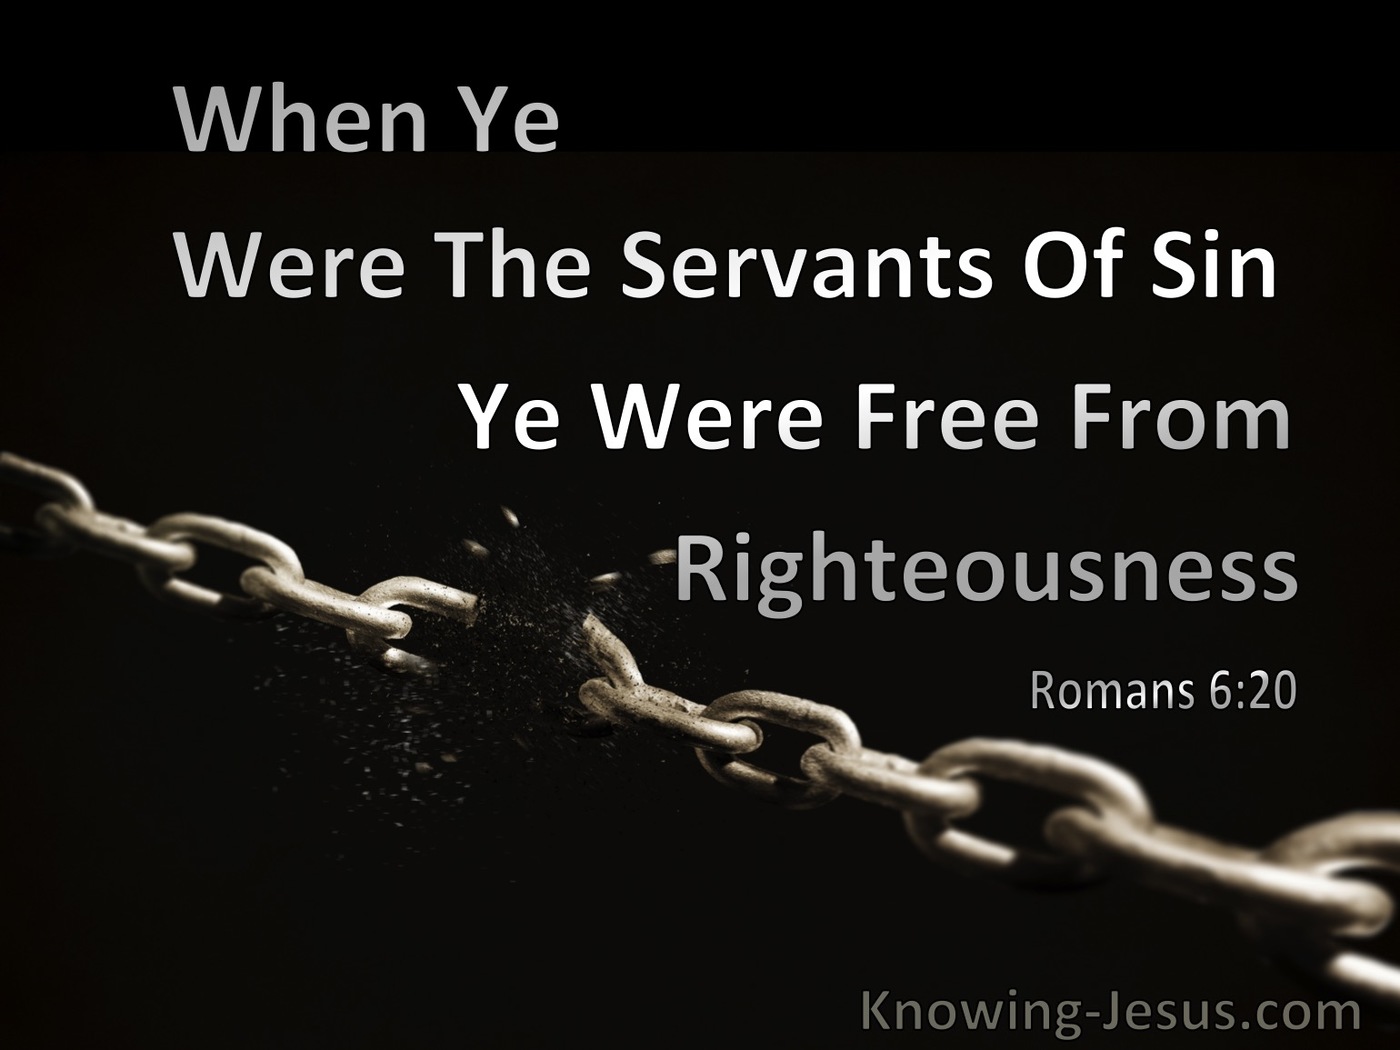 Romans 6:20 When Ye Were The Servants Of Sin, Ye Were Free From Righteousness (black)